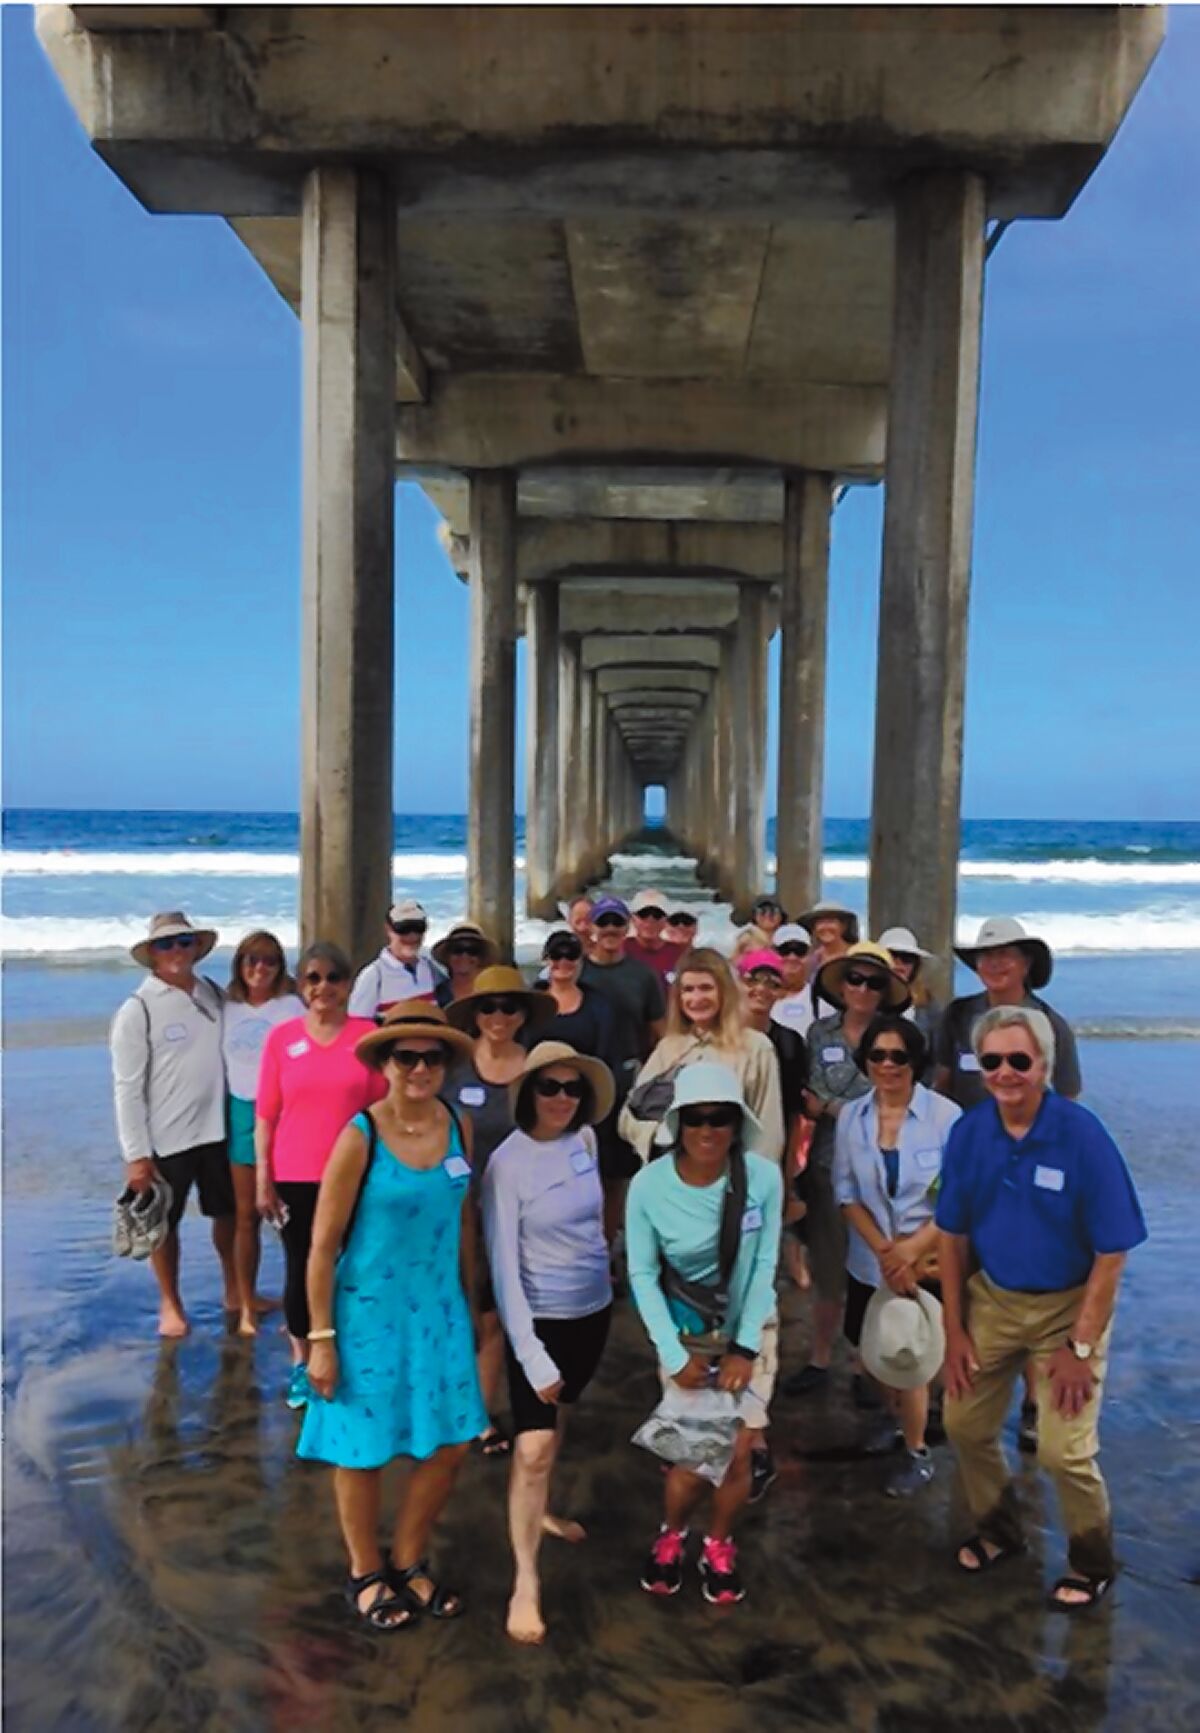 La Jolla Newcomers Club members pose under the iconic Scripps Pier.